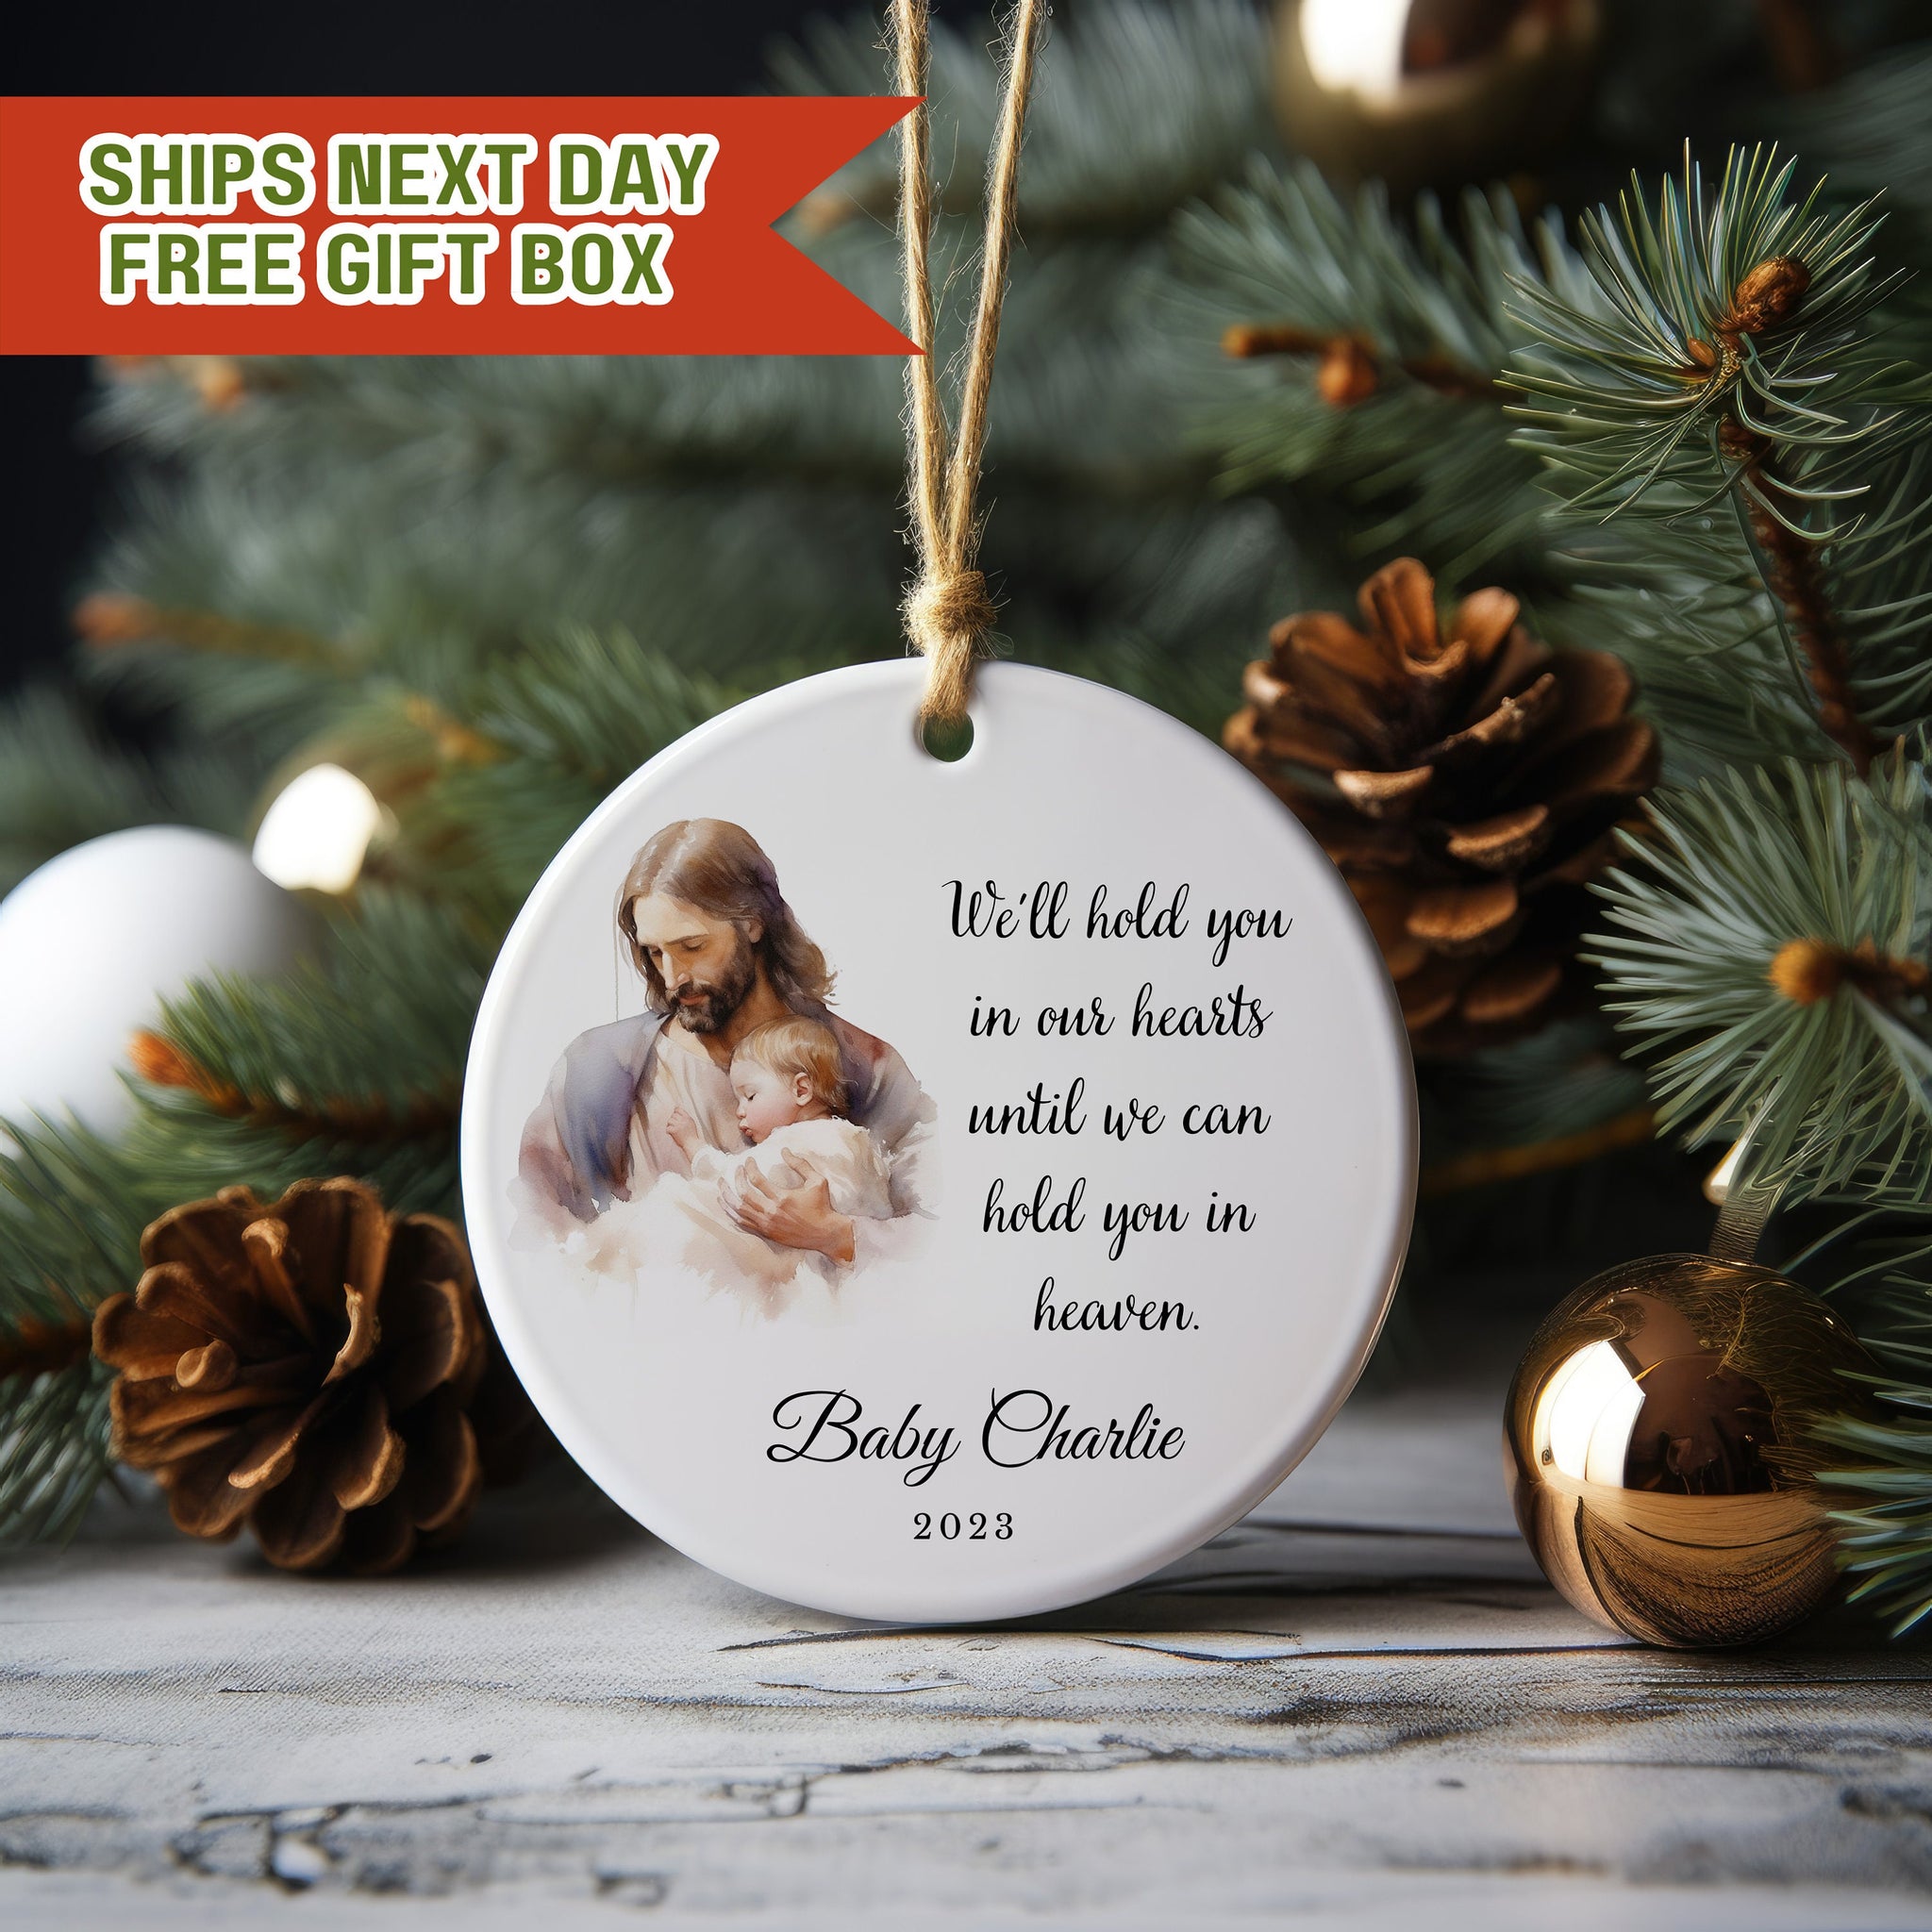 Custom Baby Memorial Ornament, Miscarriage Gift, Baby Ornament, Custom Photo Christmas Ornament, Grandma Ornament, Child Loss Sympathy Gift